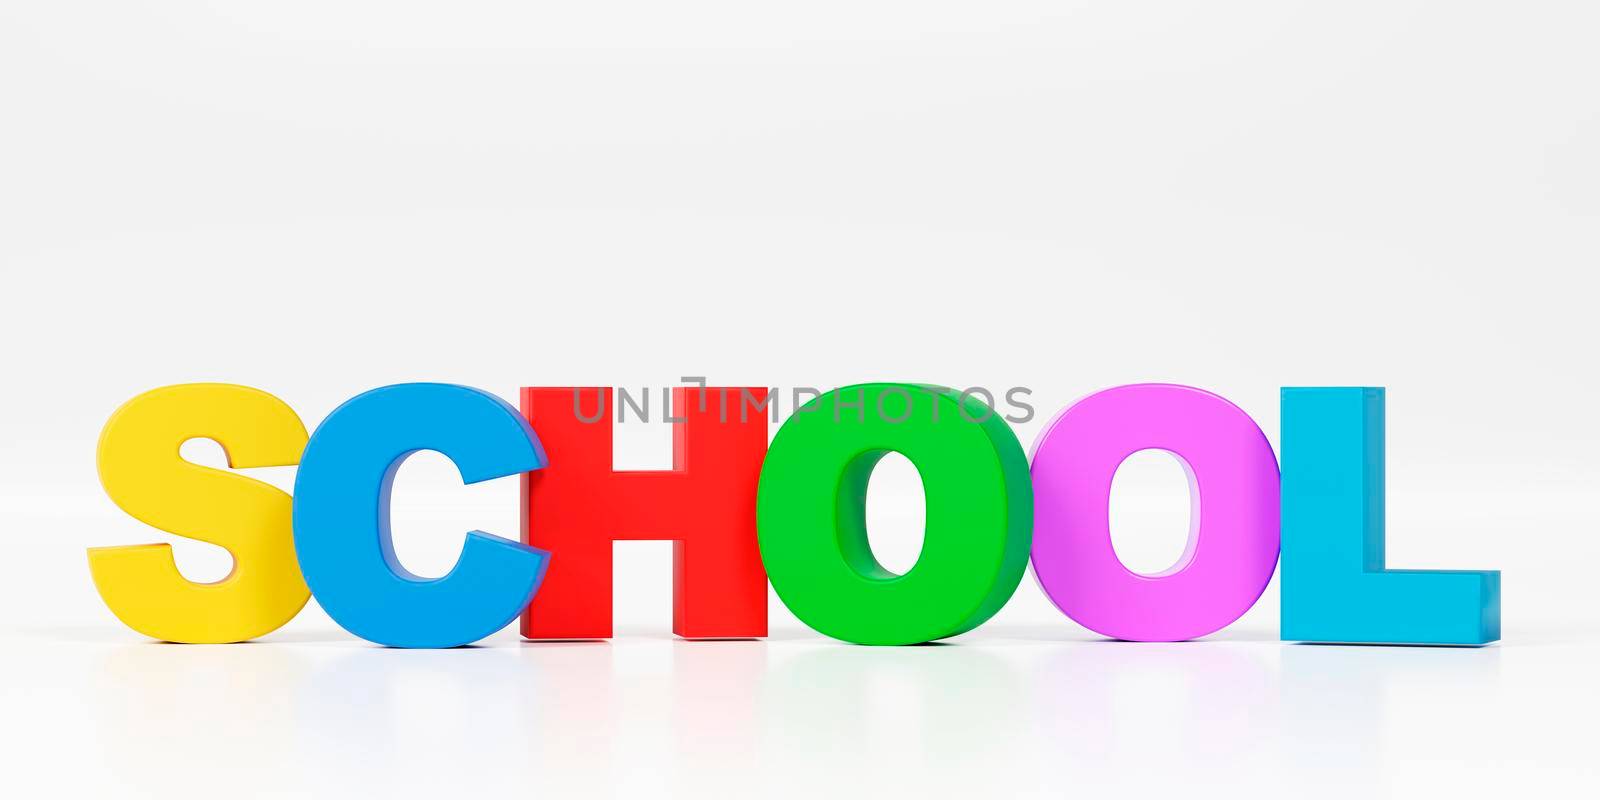 3d "school" text on white background. 3d illustration by raferto1973